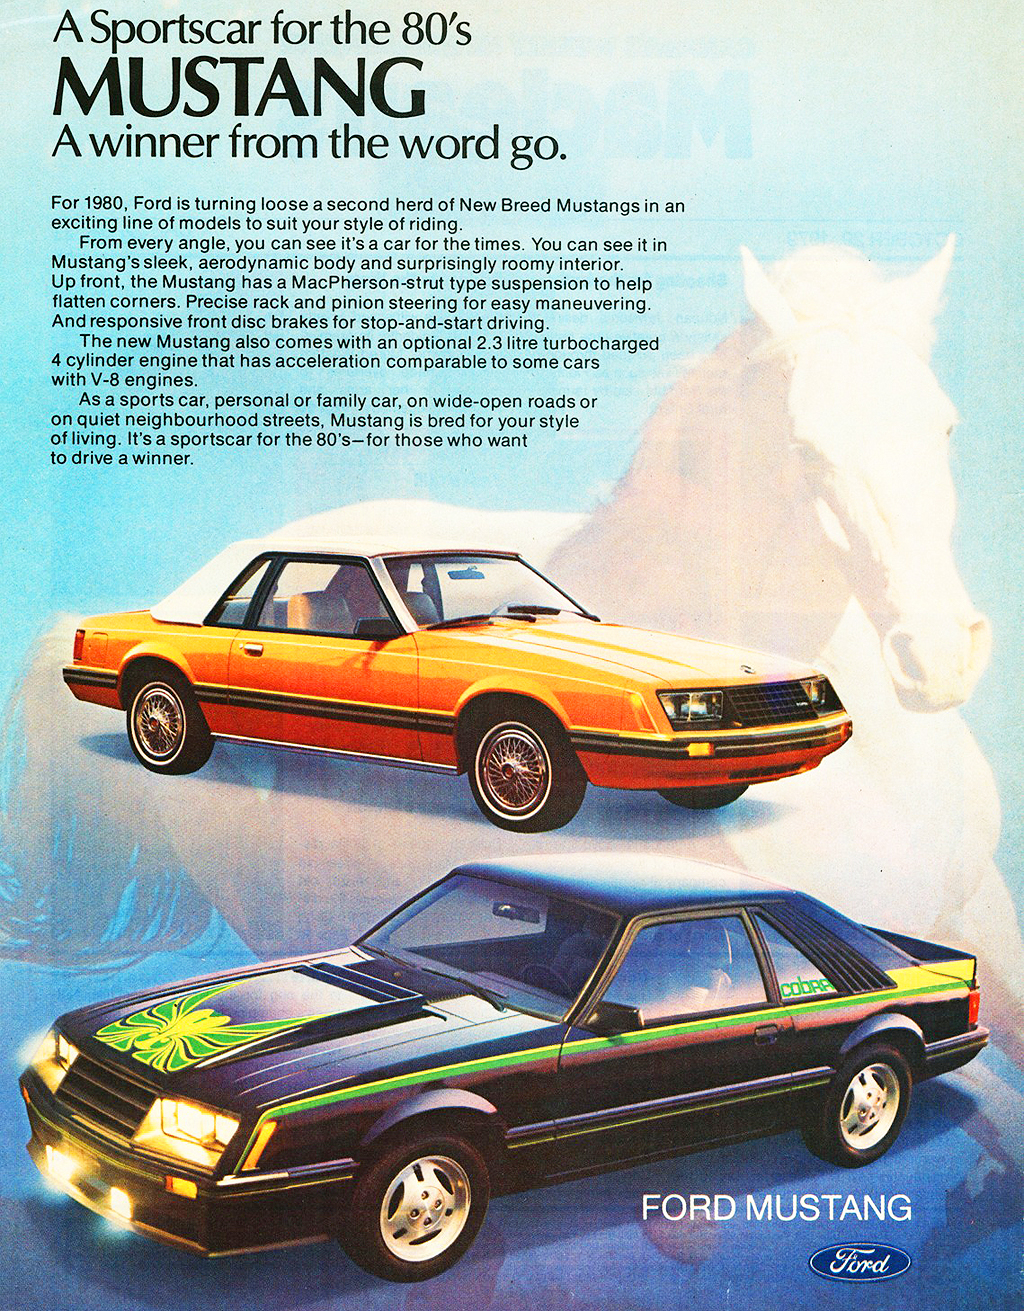 Ford mustang car advertisements #4